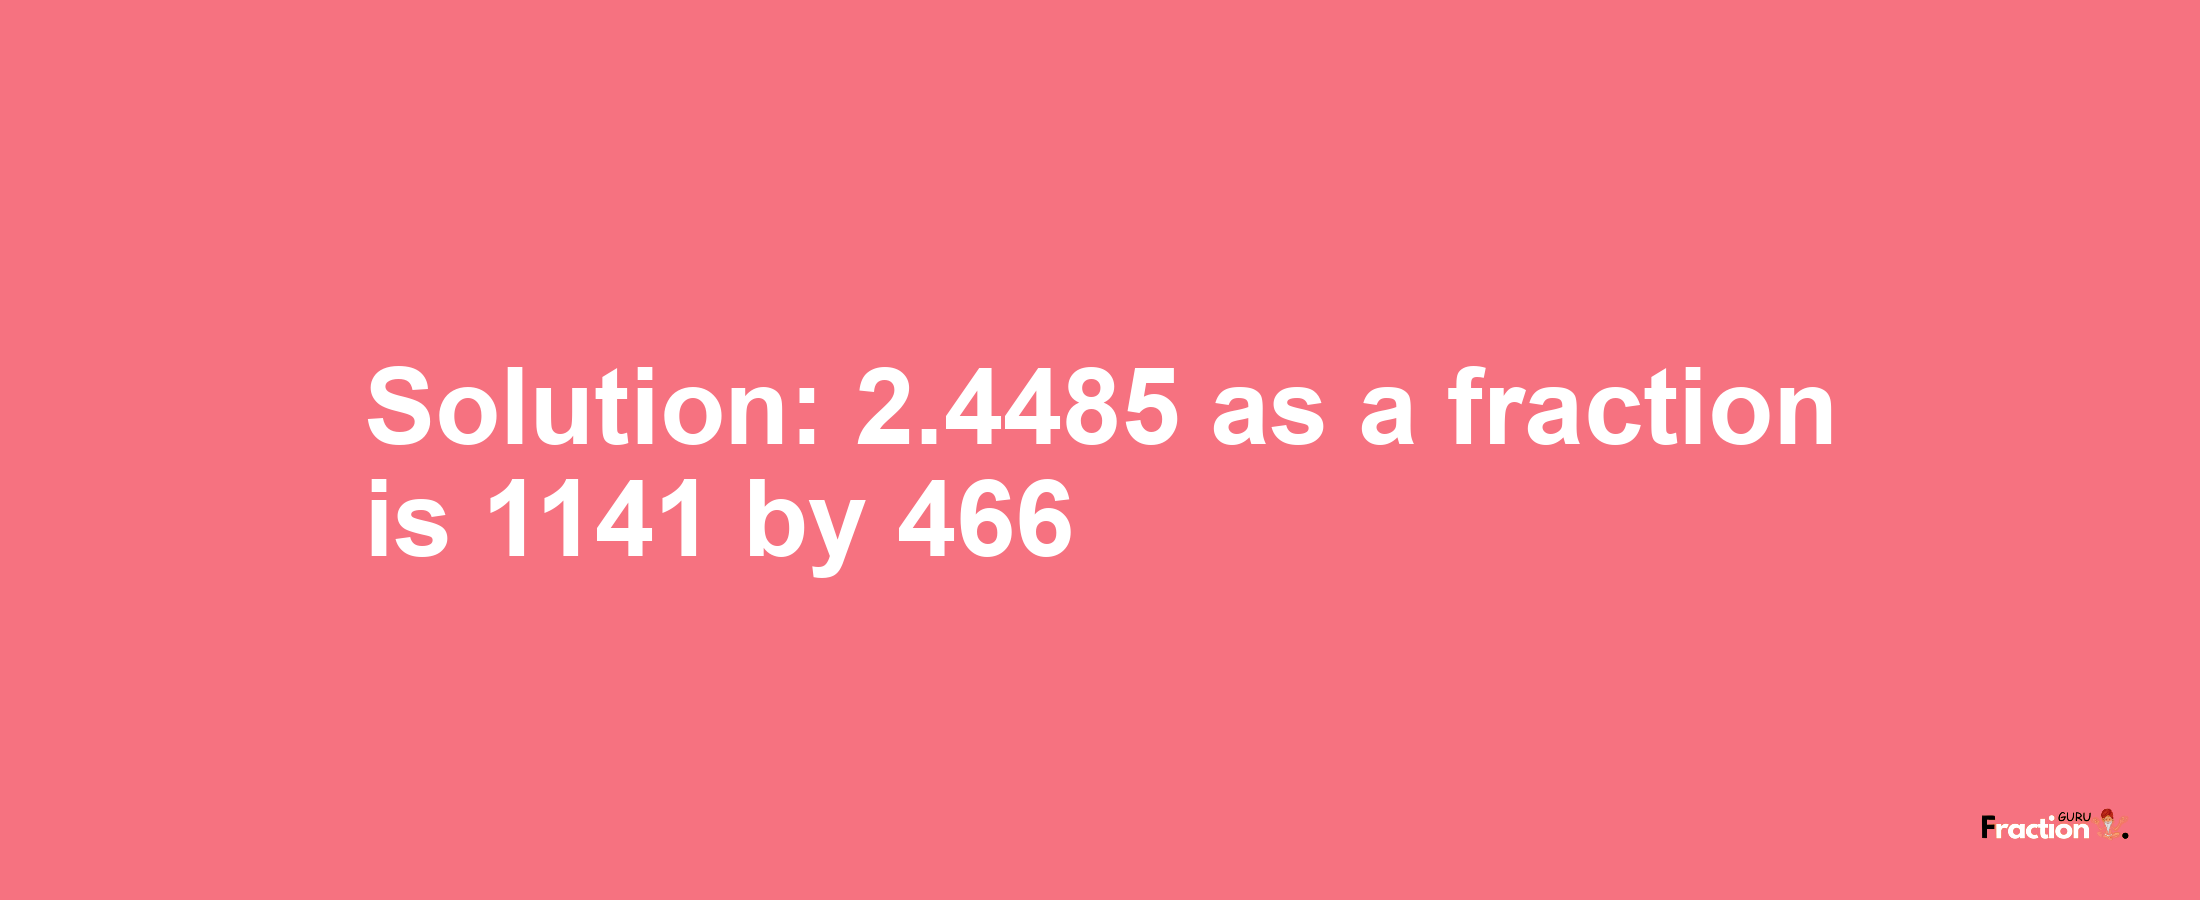 Solution:2.4485 as a fraction is 1141/466